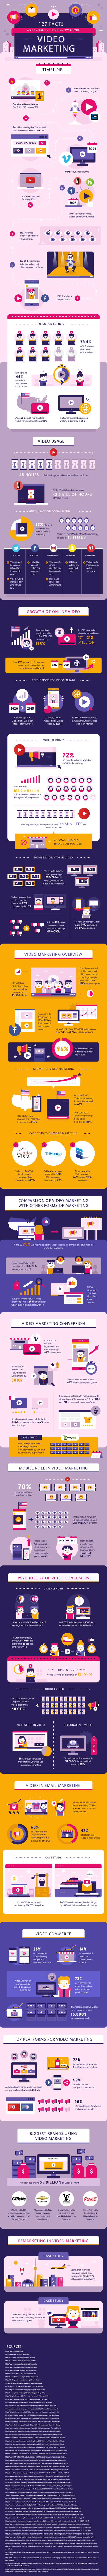 127-Video-marketing-facts.png